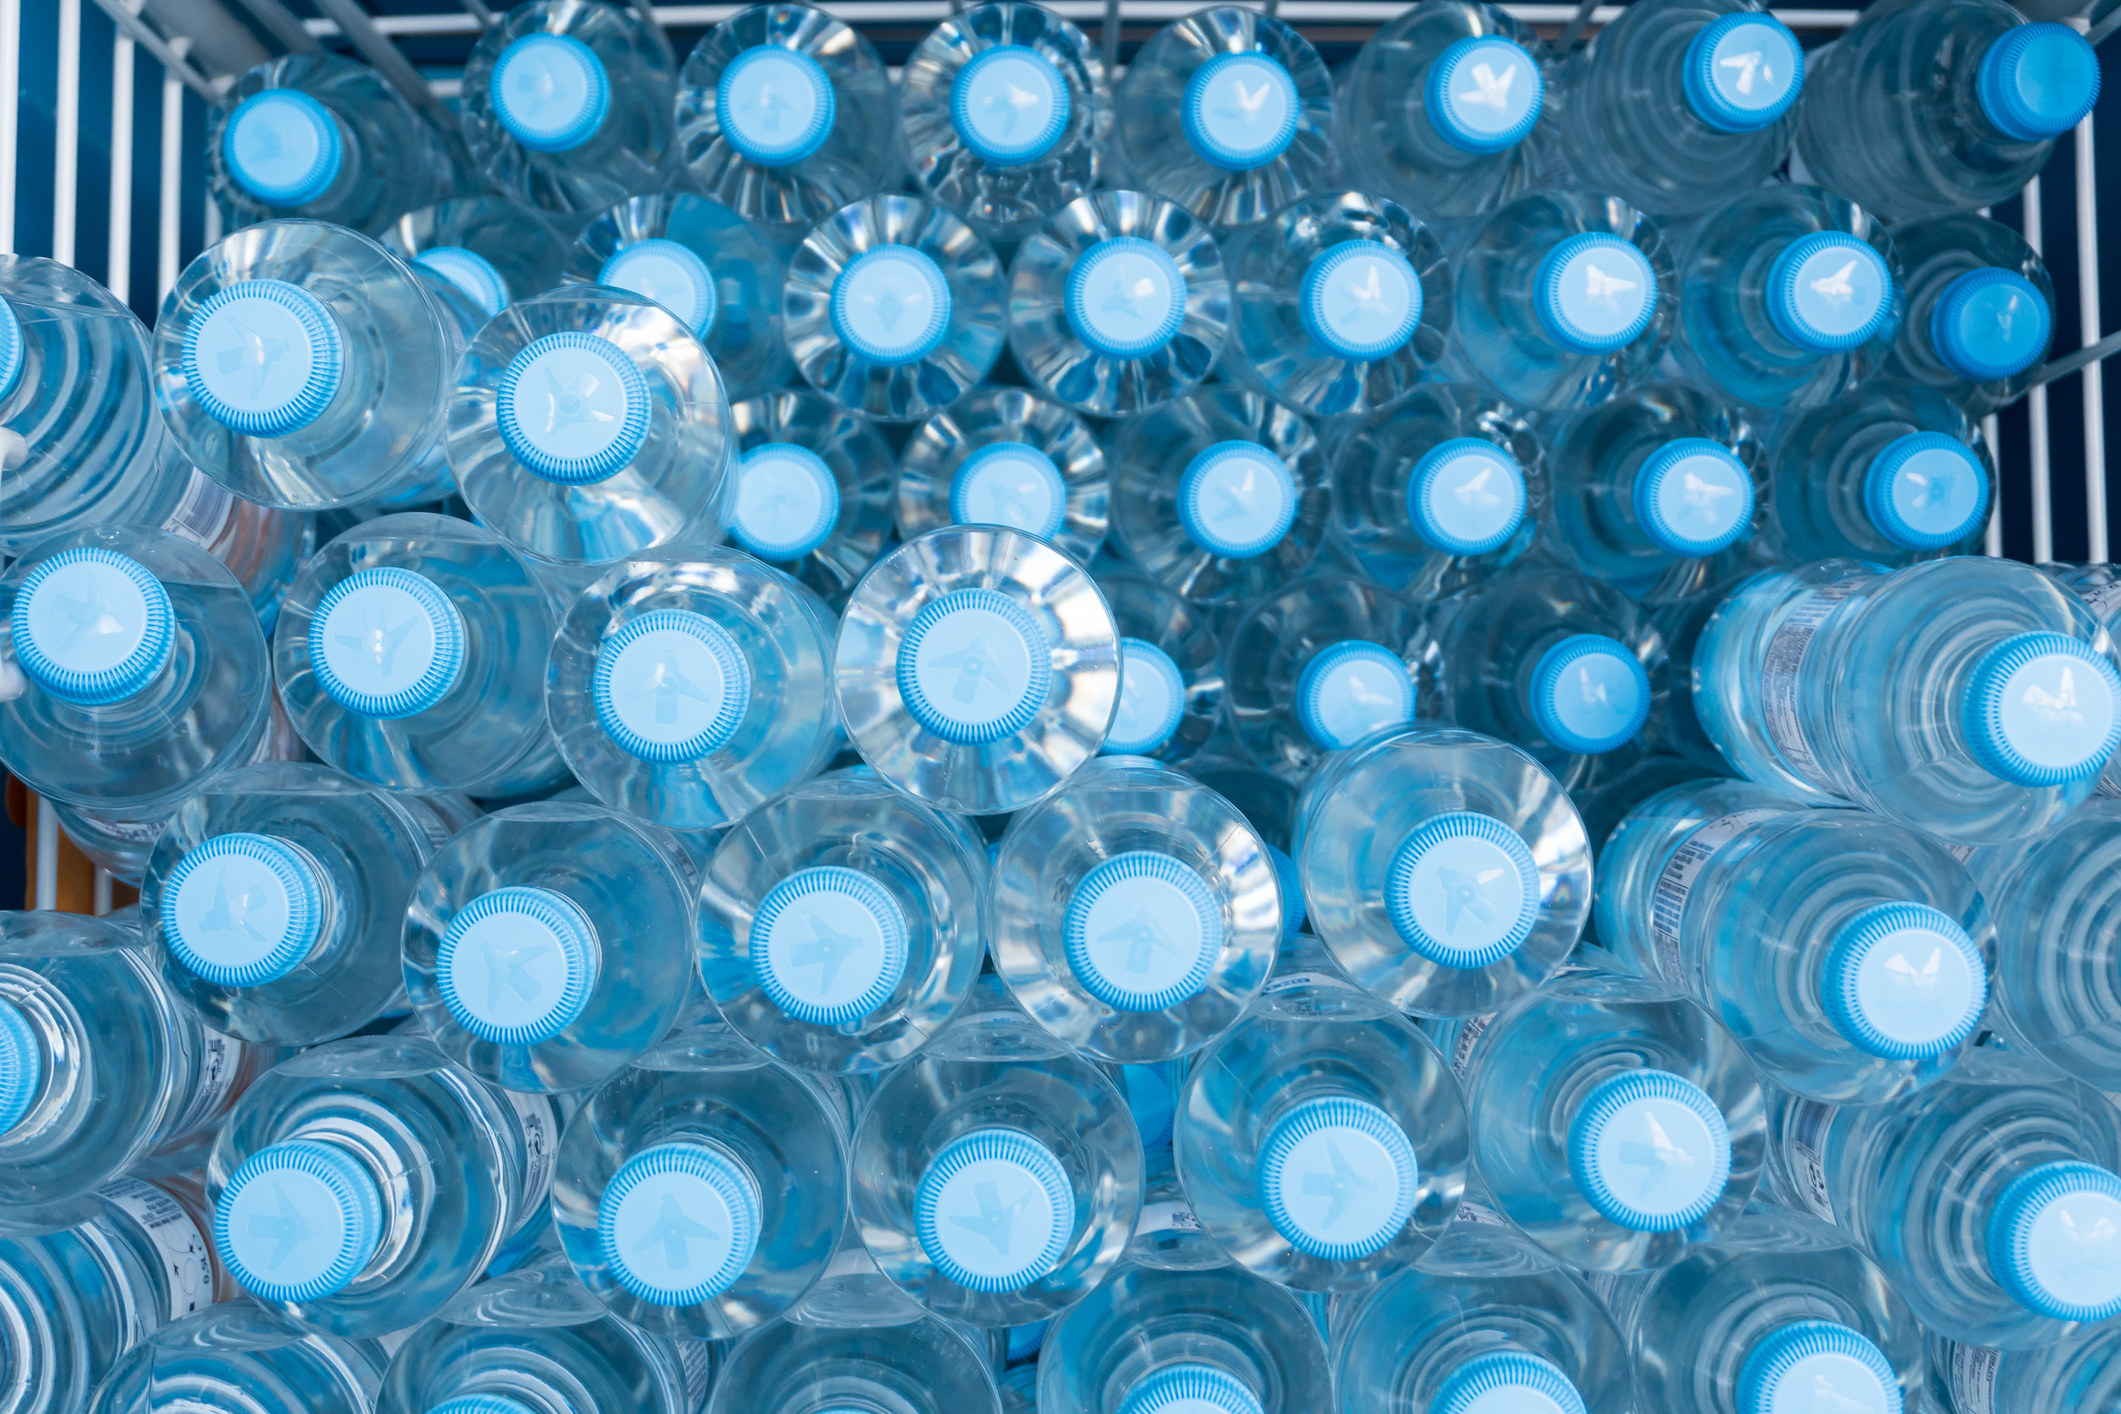 Dozens of plastic waters bottles stacked up